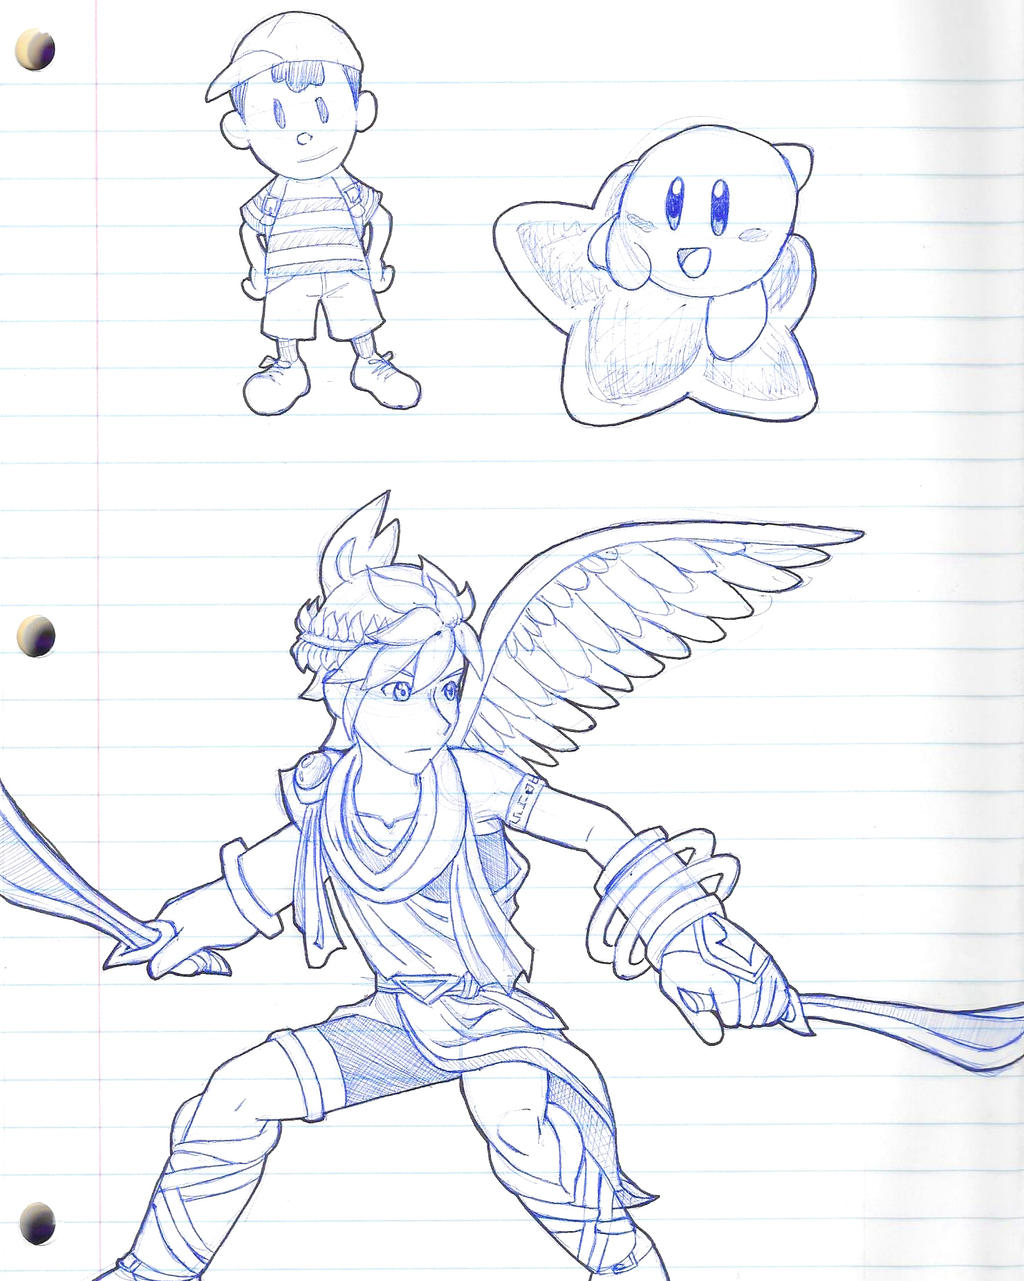 Conference Doodles Smash Style